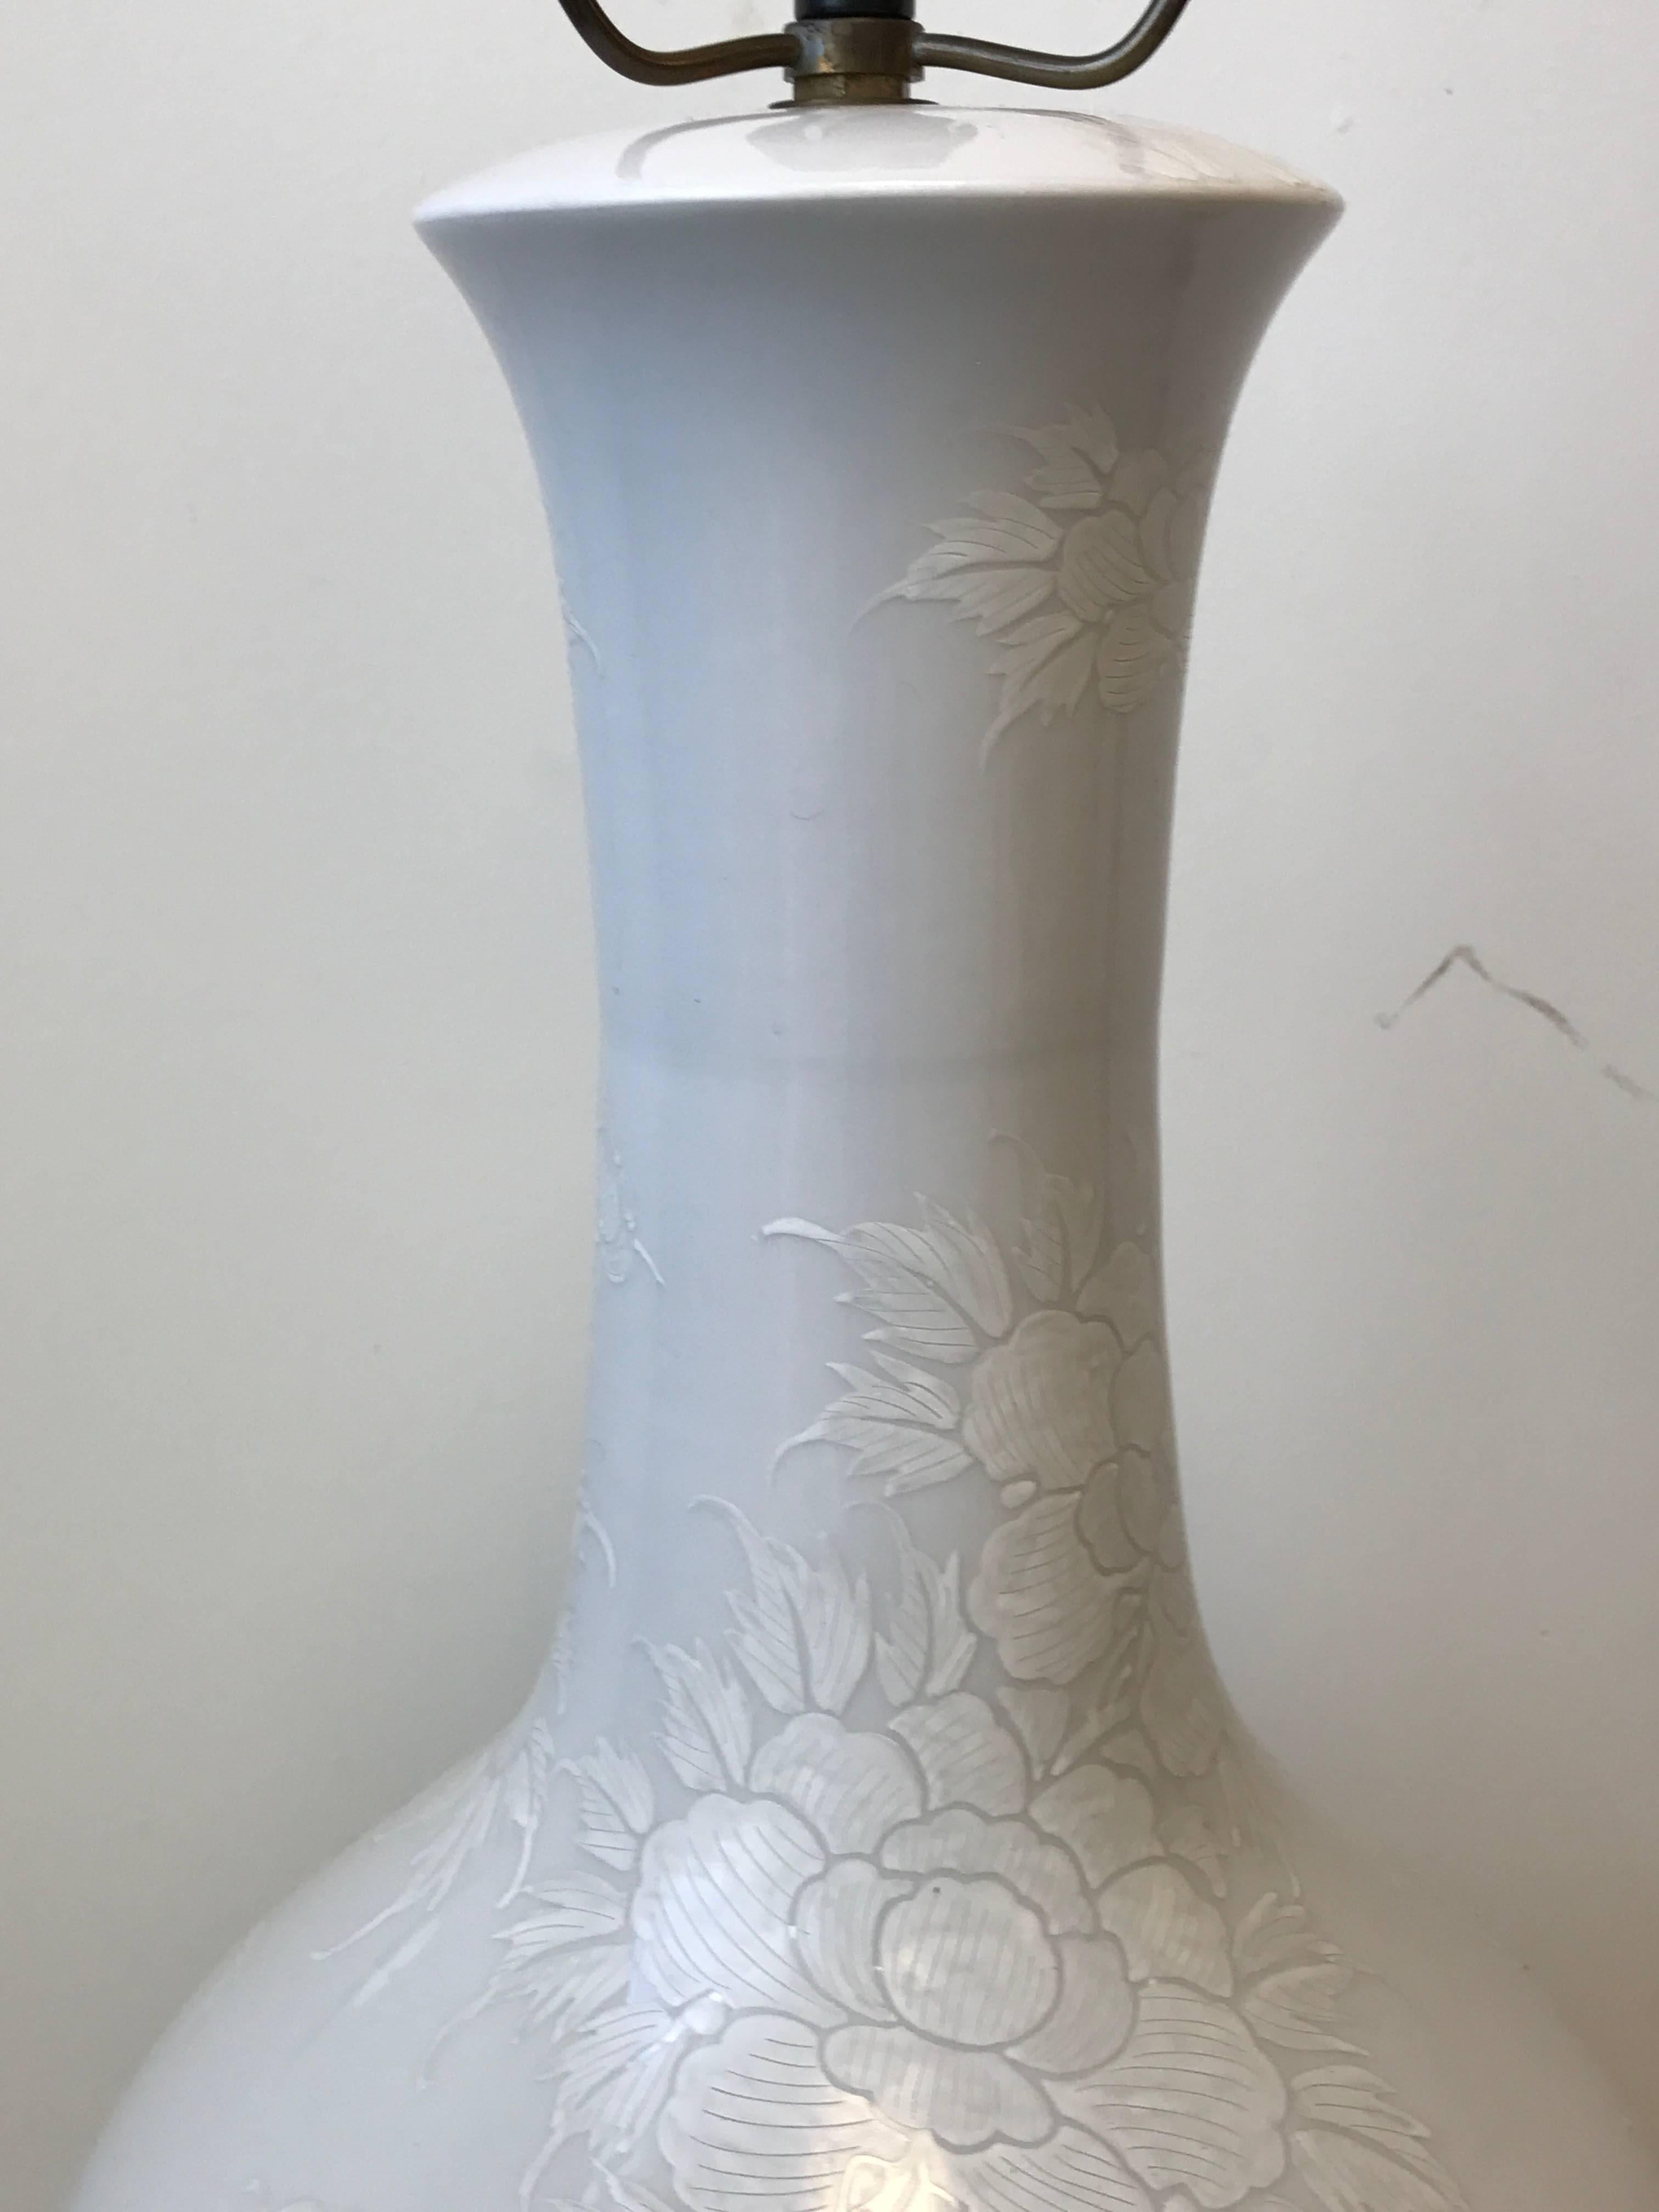 Chinoiserie 1960s Large Blanc de Chine Lamp with Hand-Painted Monochrome Floral Motif For Sale